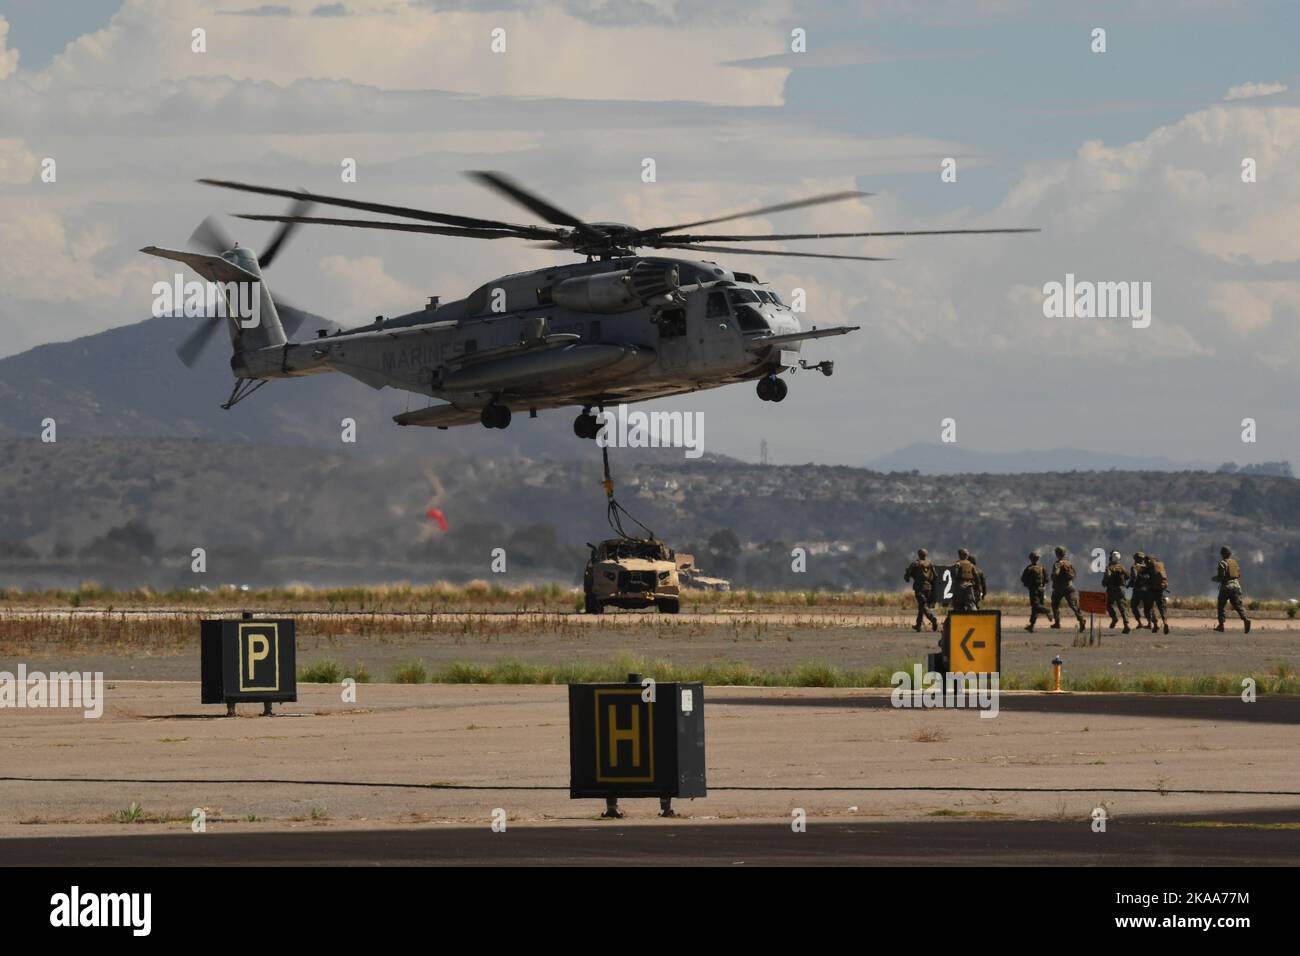 USMC CH-53E Super Stallion helicopter drops off a vehicle aboard MCAS Miramar in San Diego, California Stock Photo